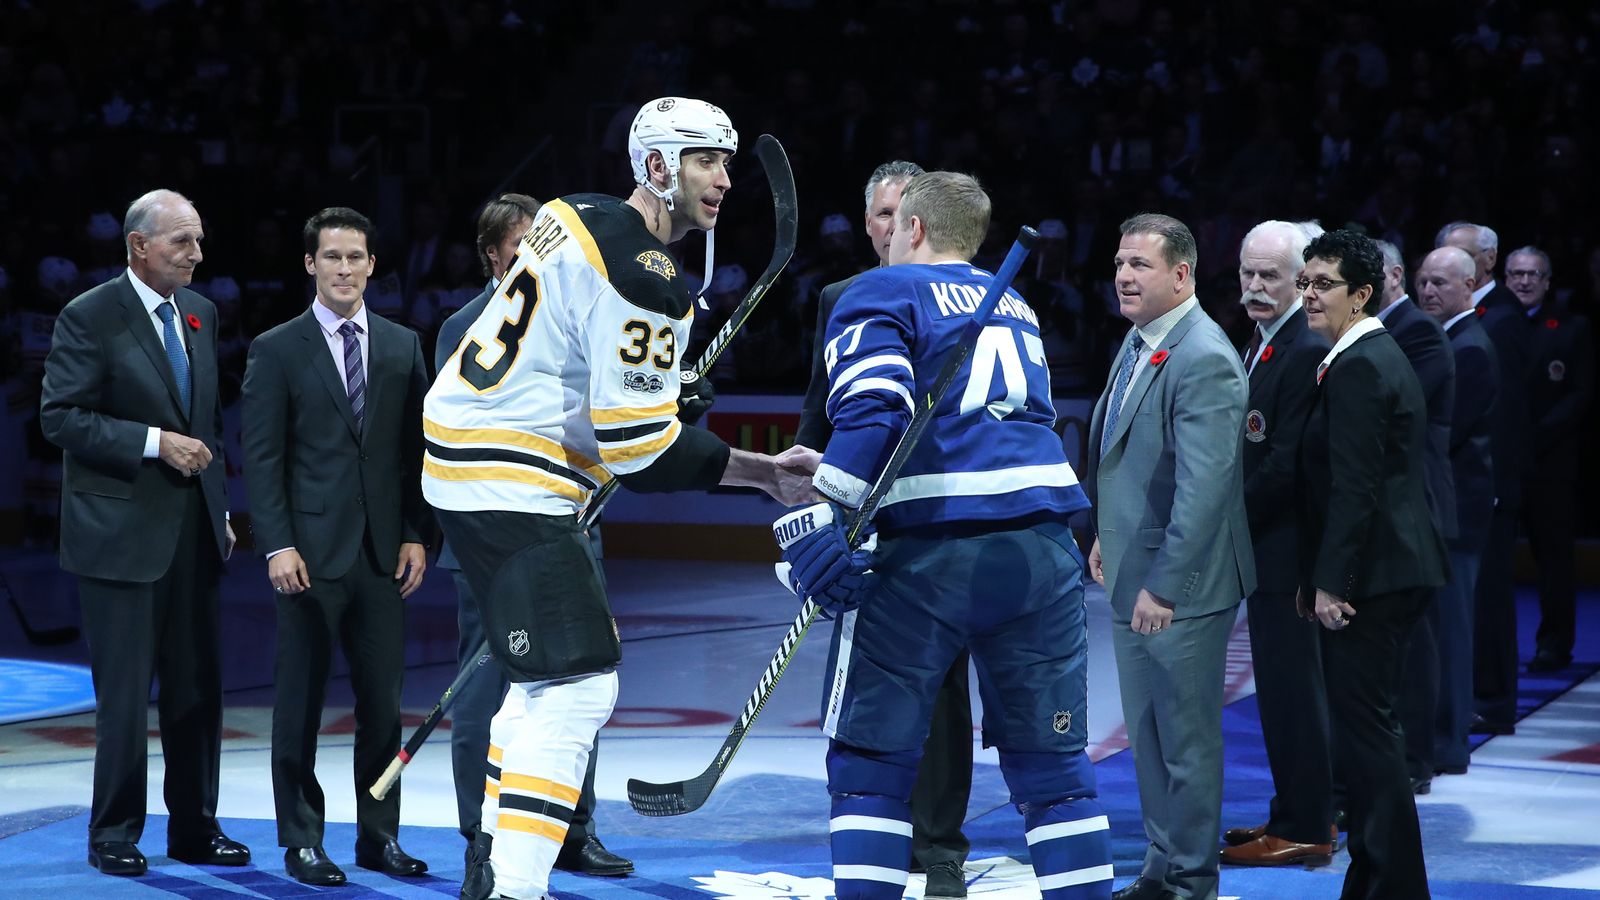 Boston Bruins: Jeremy Jacobs and Mark Recchi to join Hockey HOF